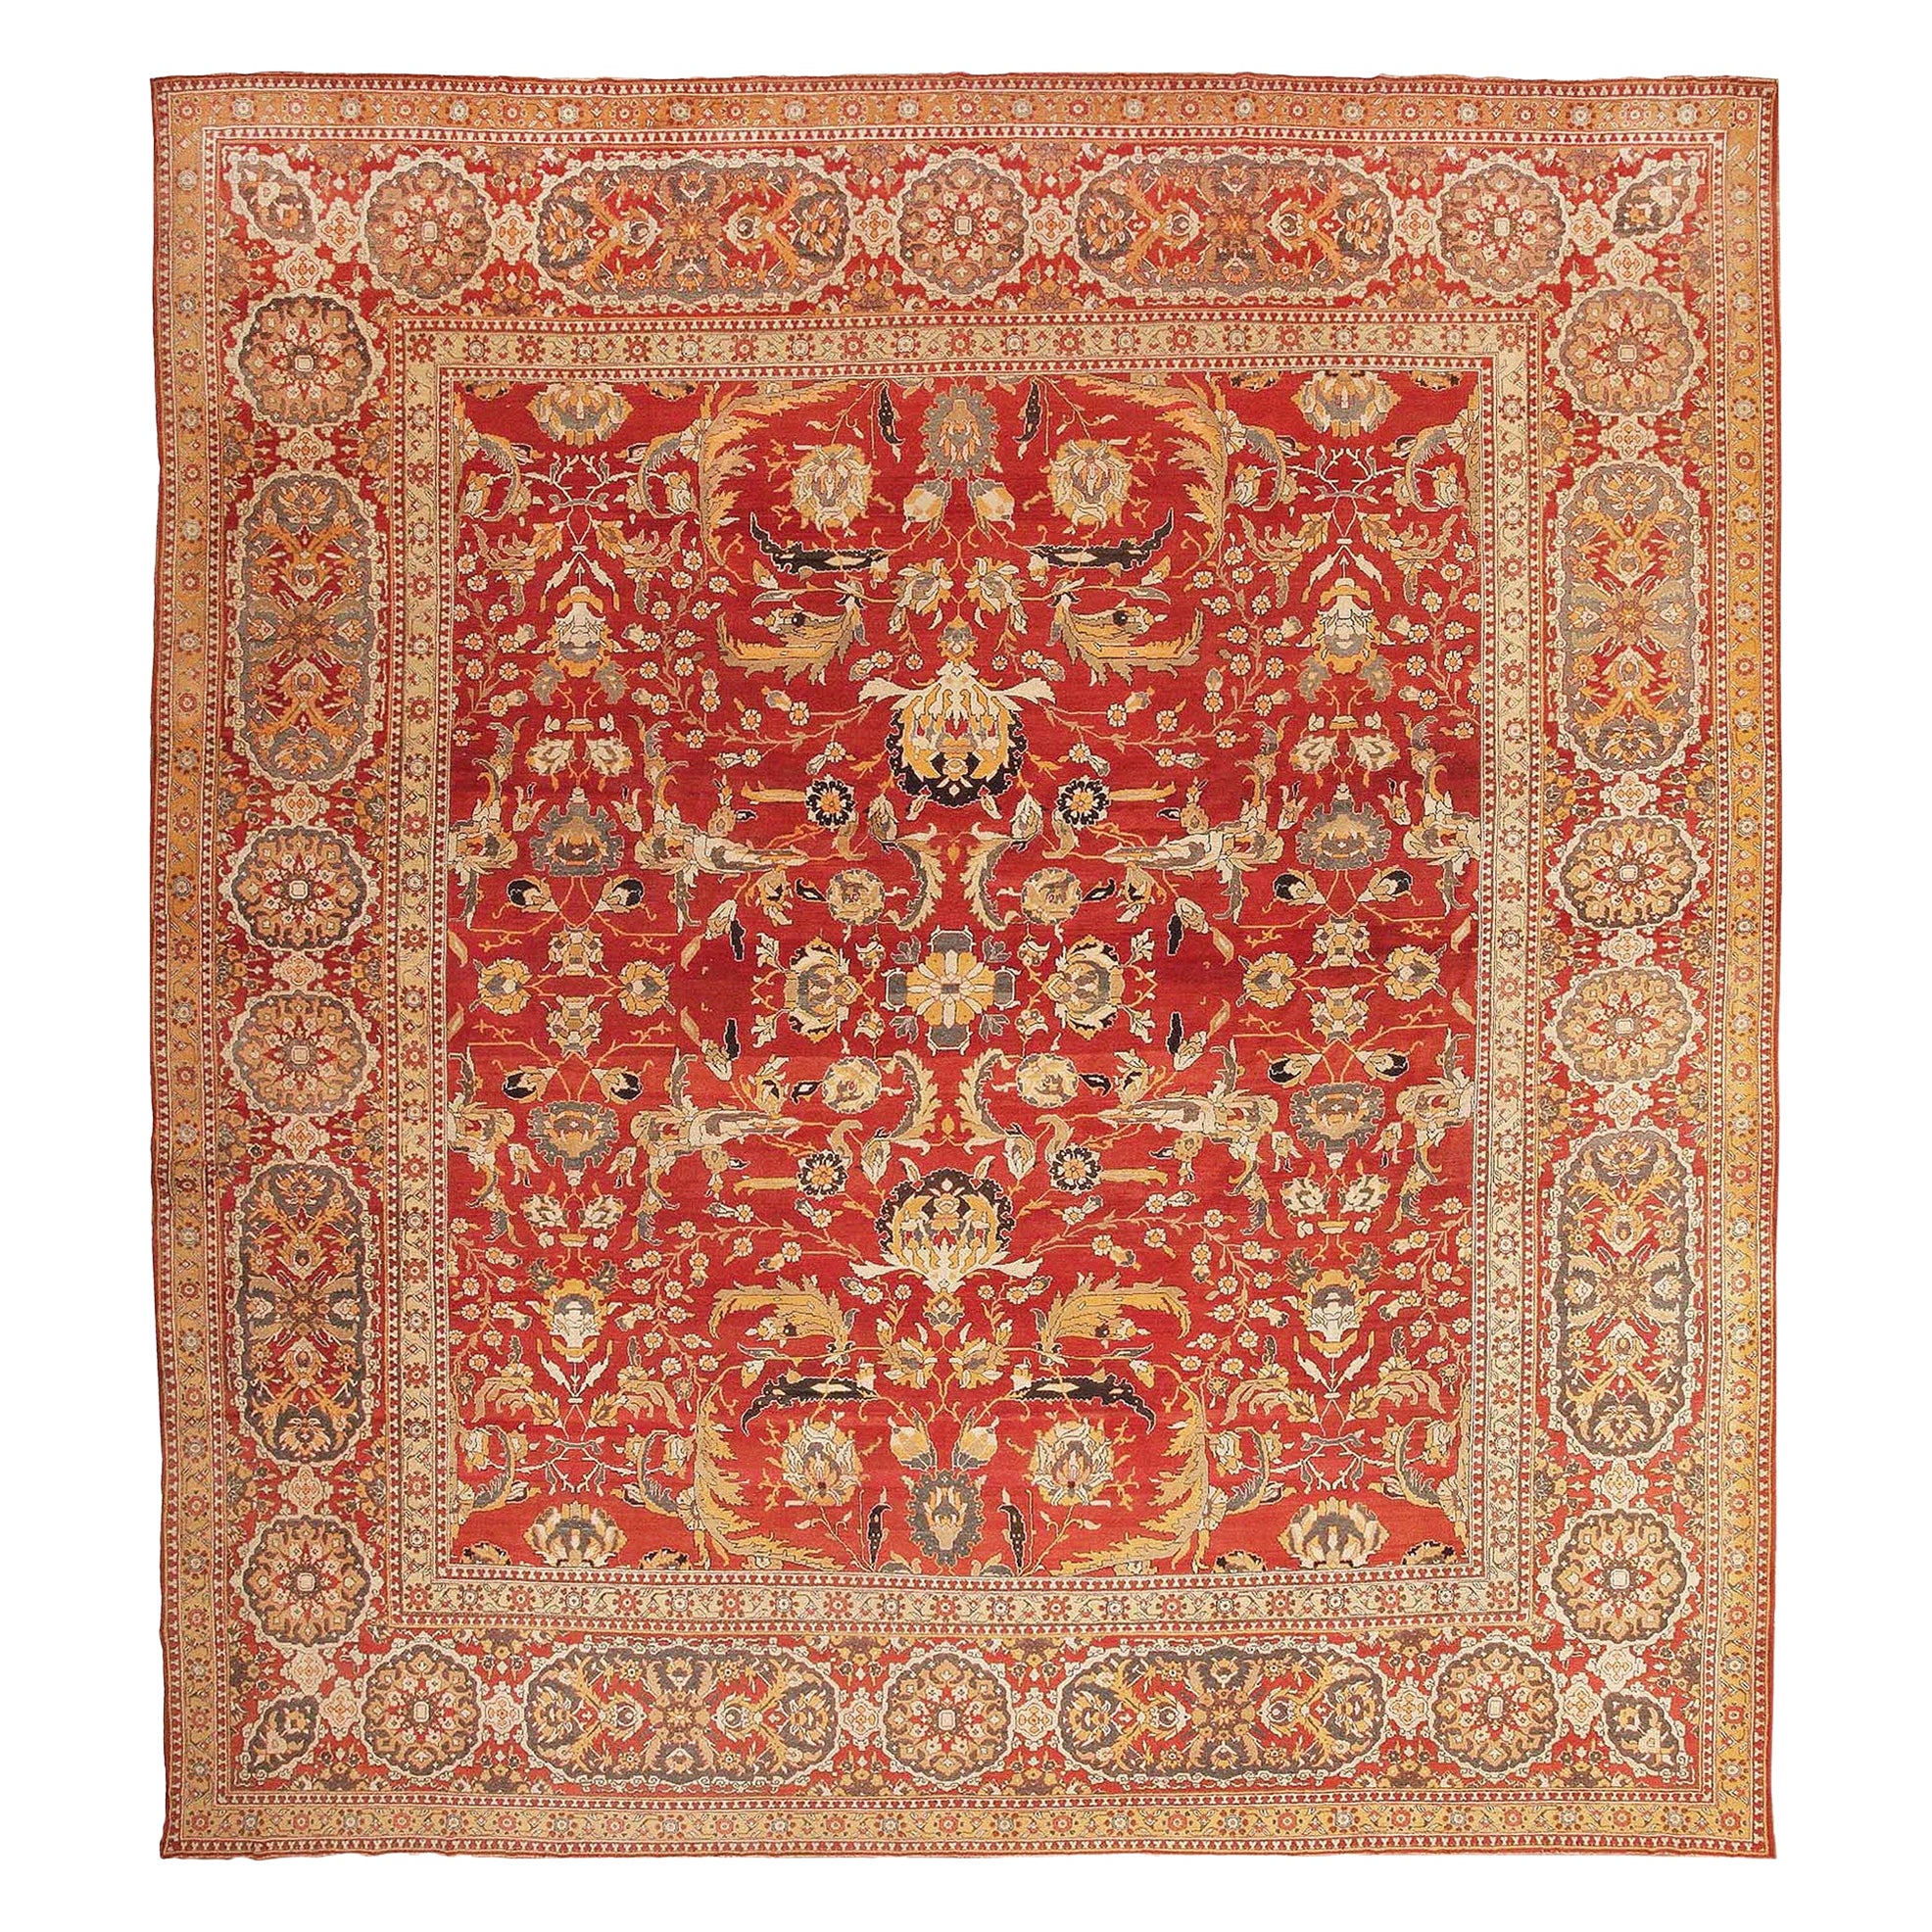 Antique Indian Agra Carpet. Size: 18 ft x 19 ft 1 in For Sale